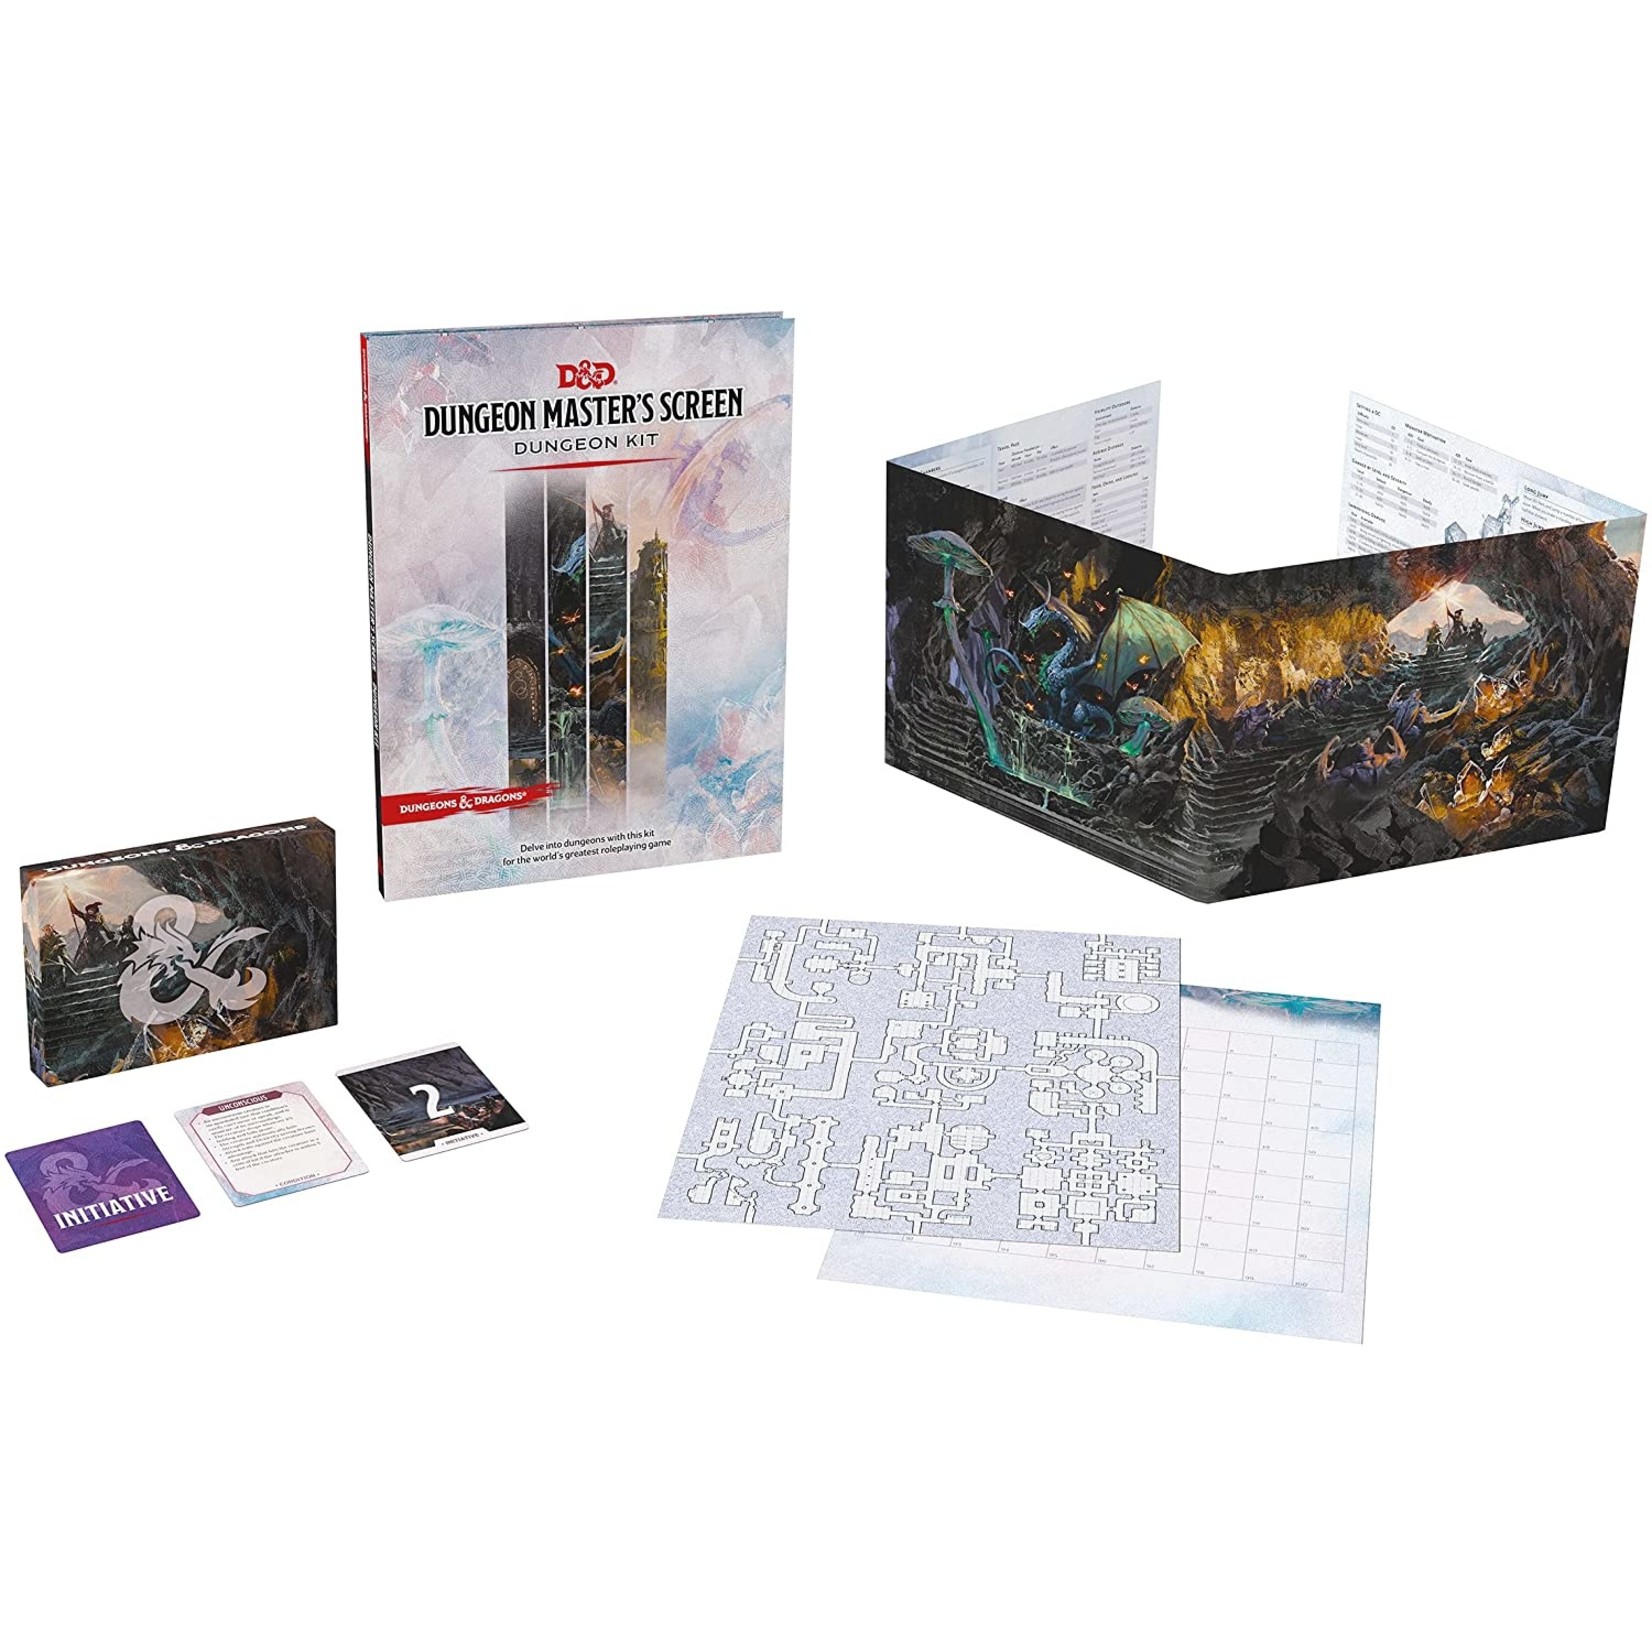 Wizards of the Coast Dungeon Master's Screen - Dungeon Kit